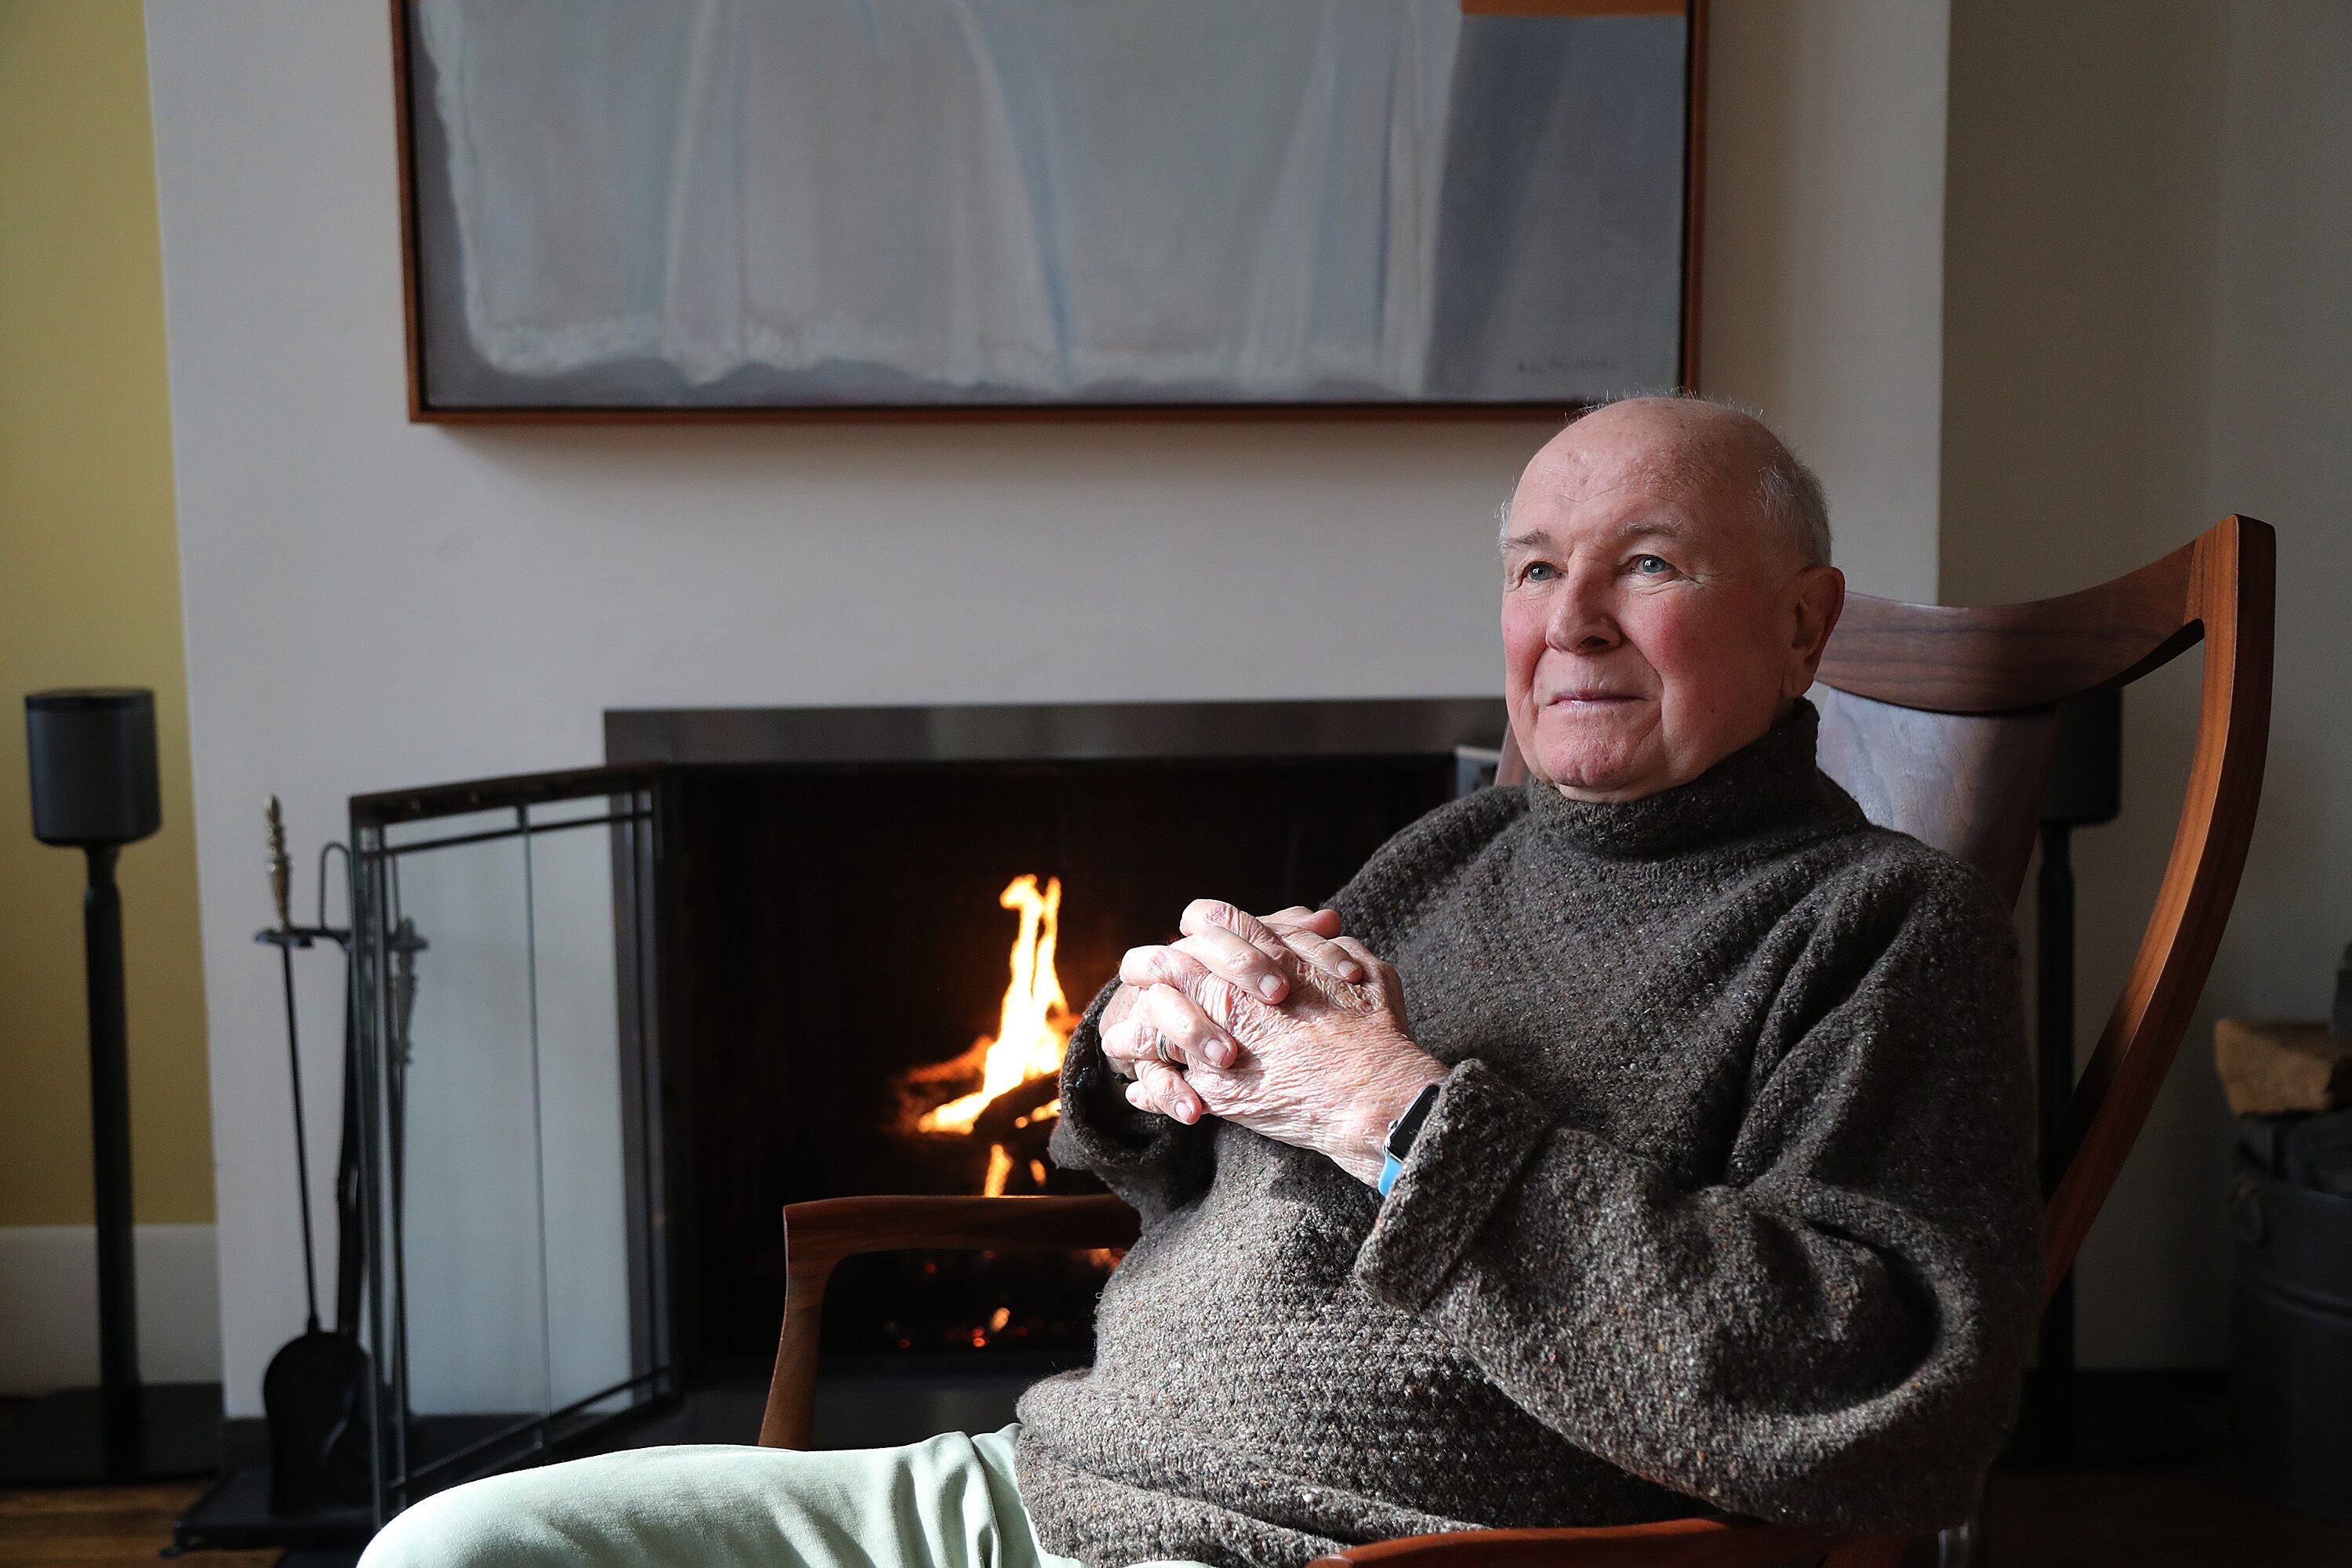 Terrence McNally appears in a portrait taken in his home on March 2, 2020, in New York City | Photo: Al Pereira/Getty Images